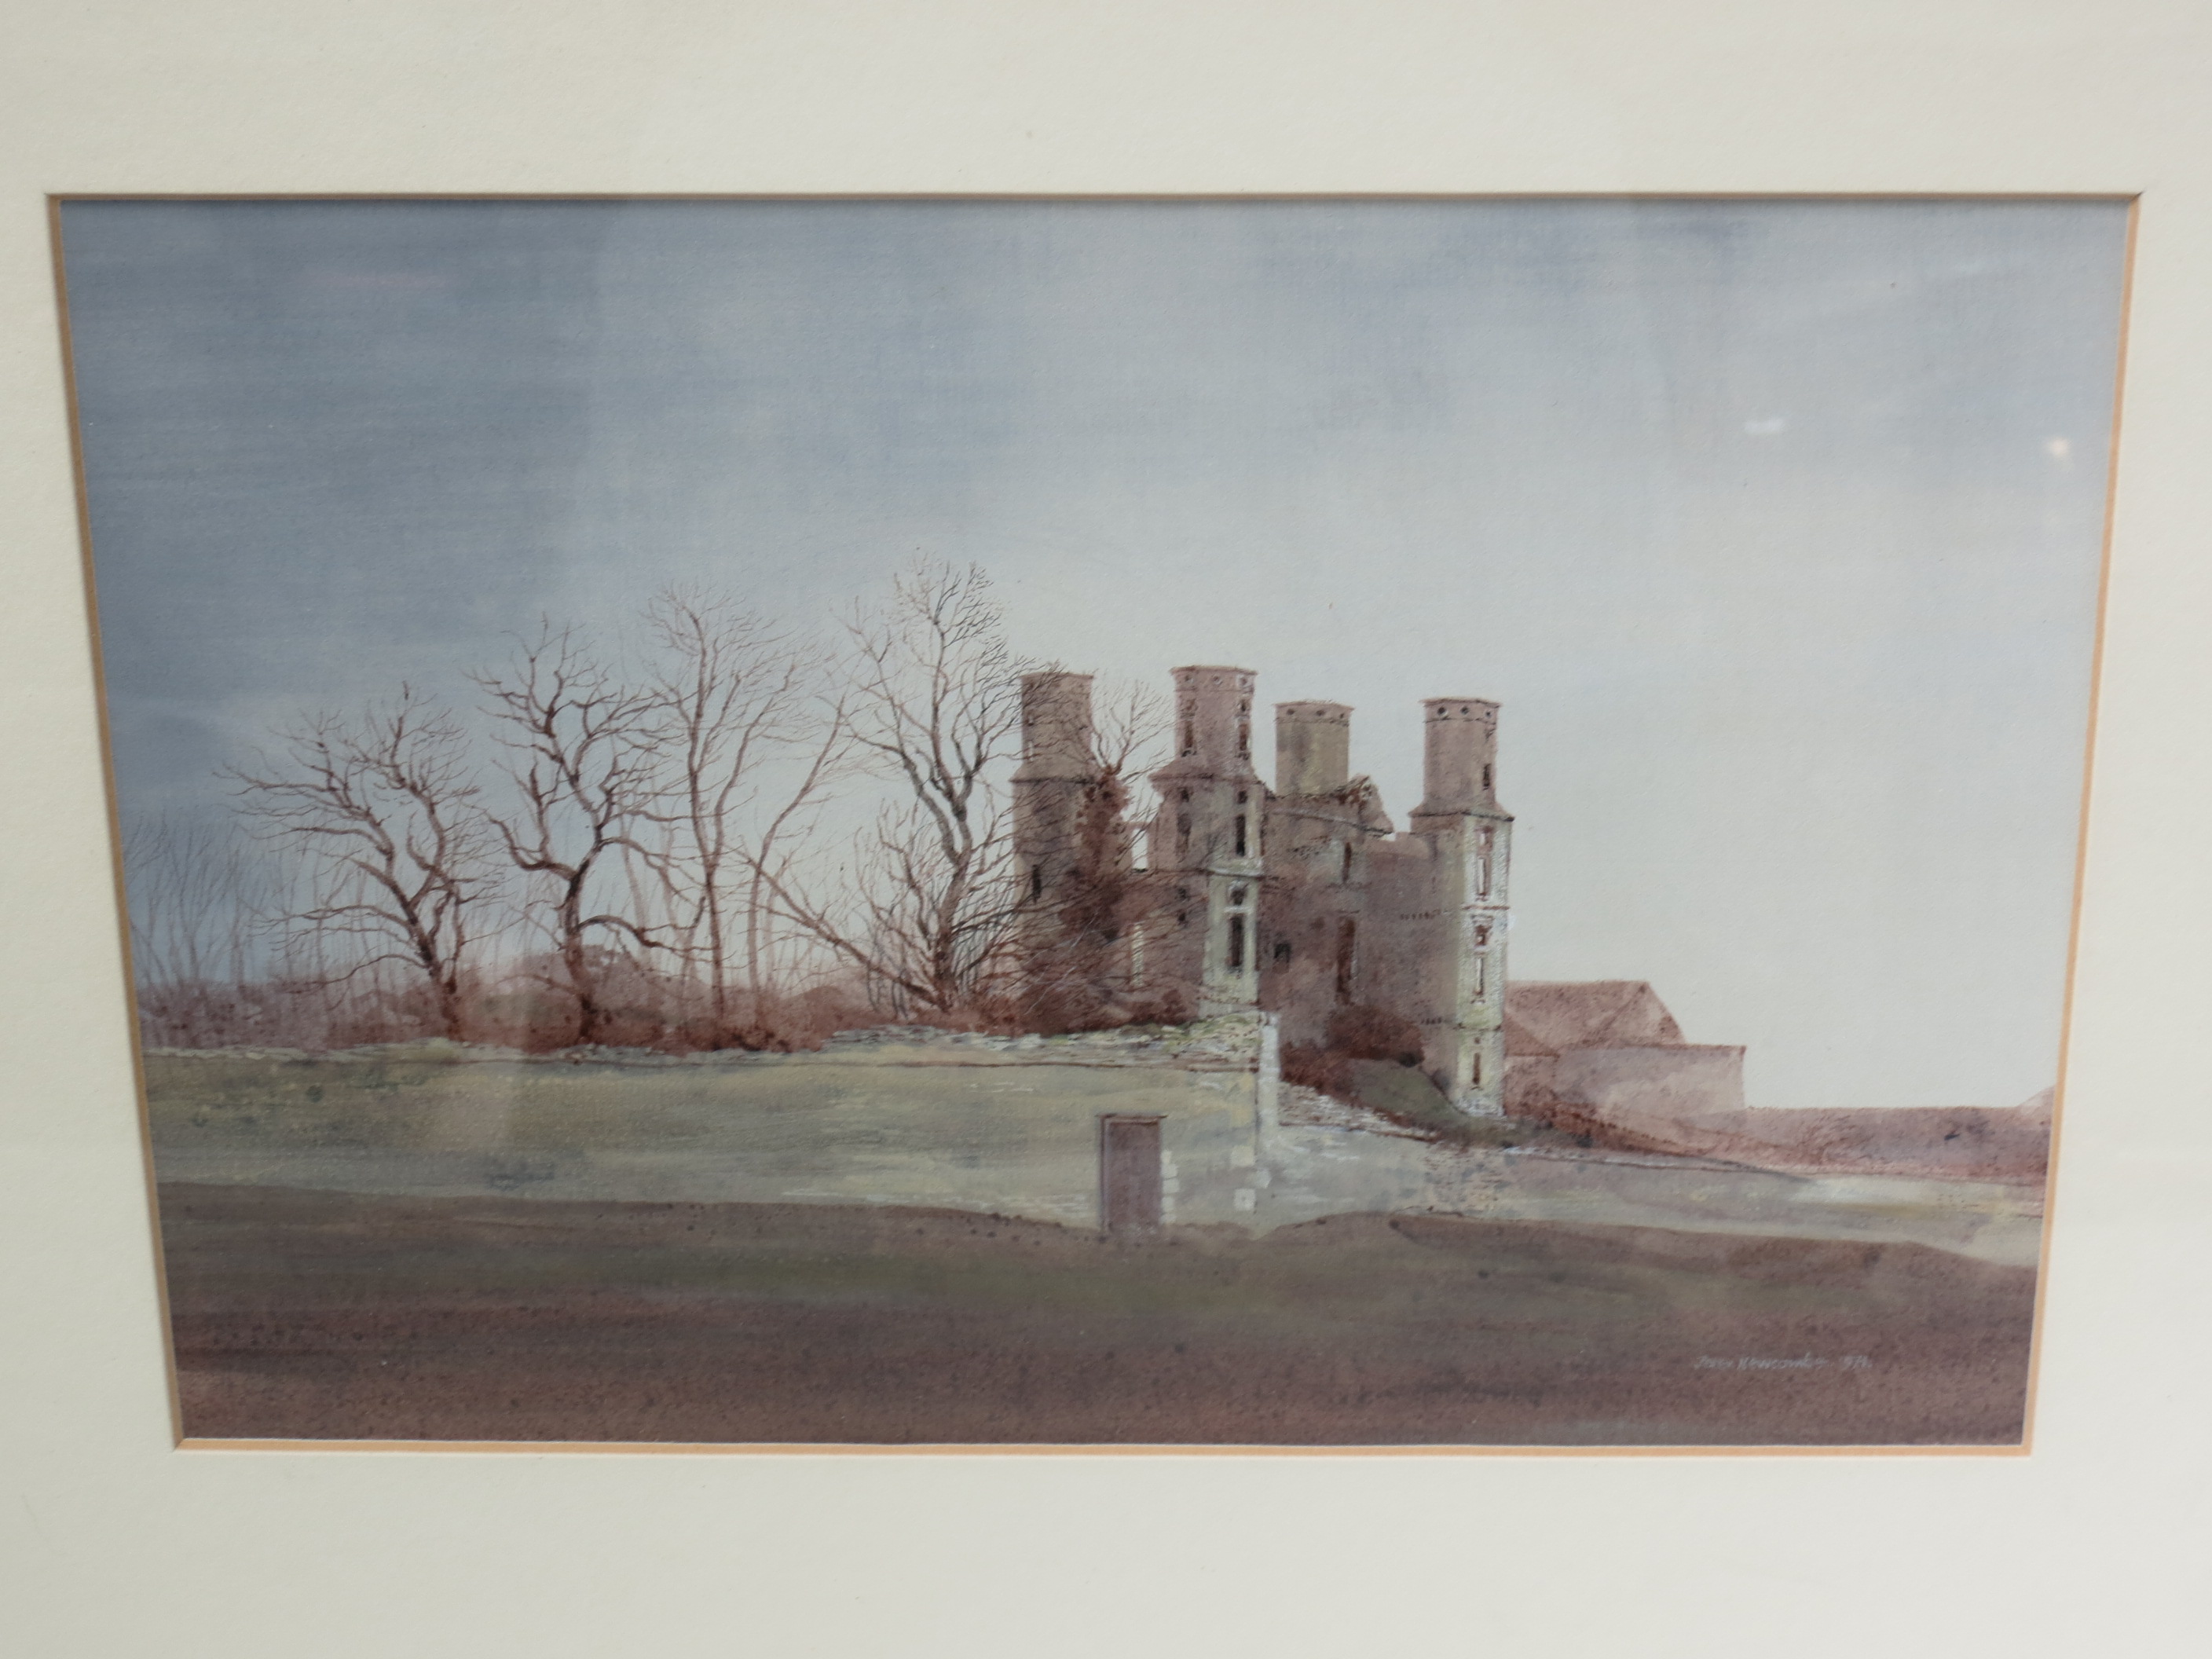 Peter Newcombe. Woethorpe Nr Stamford, watercolour, signed and dated 1971 lower right and